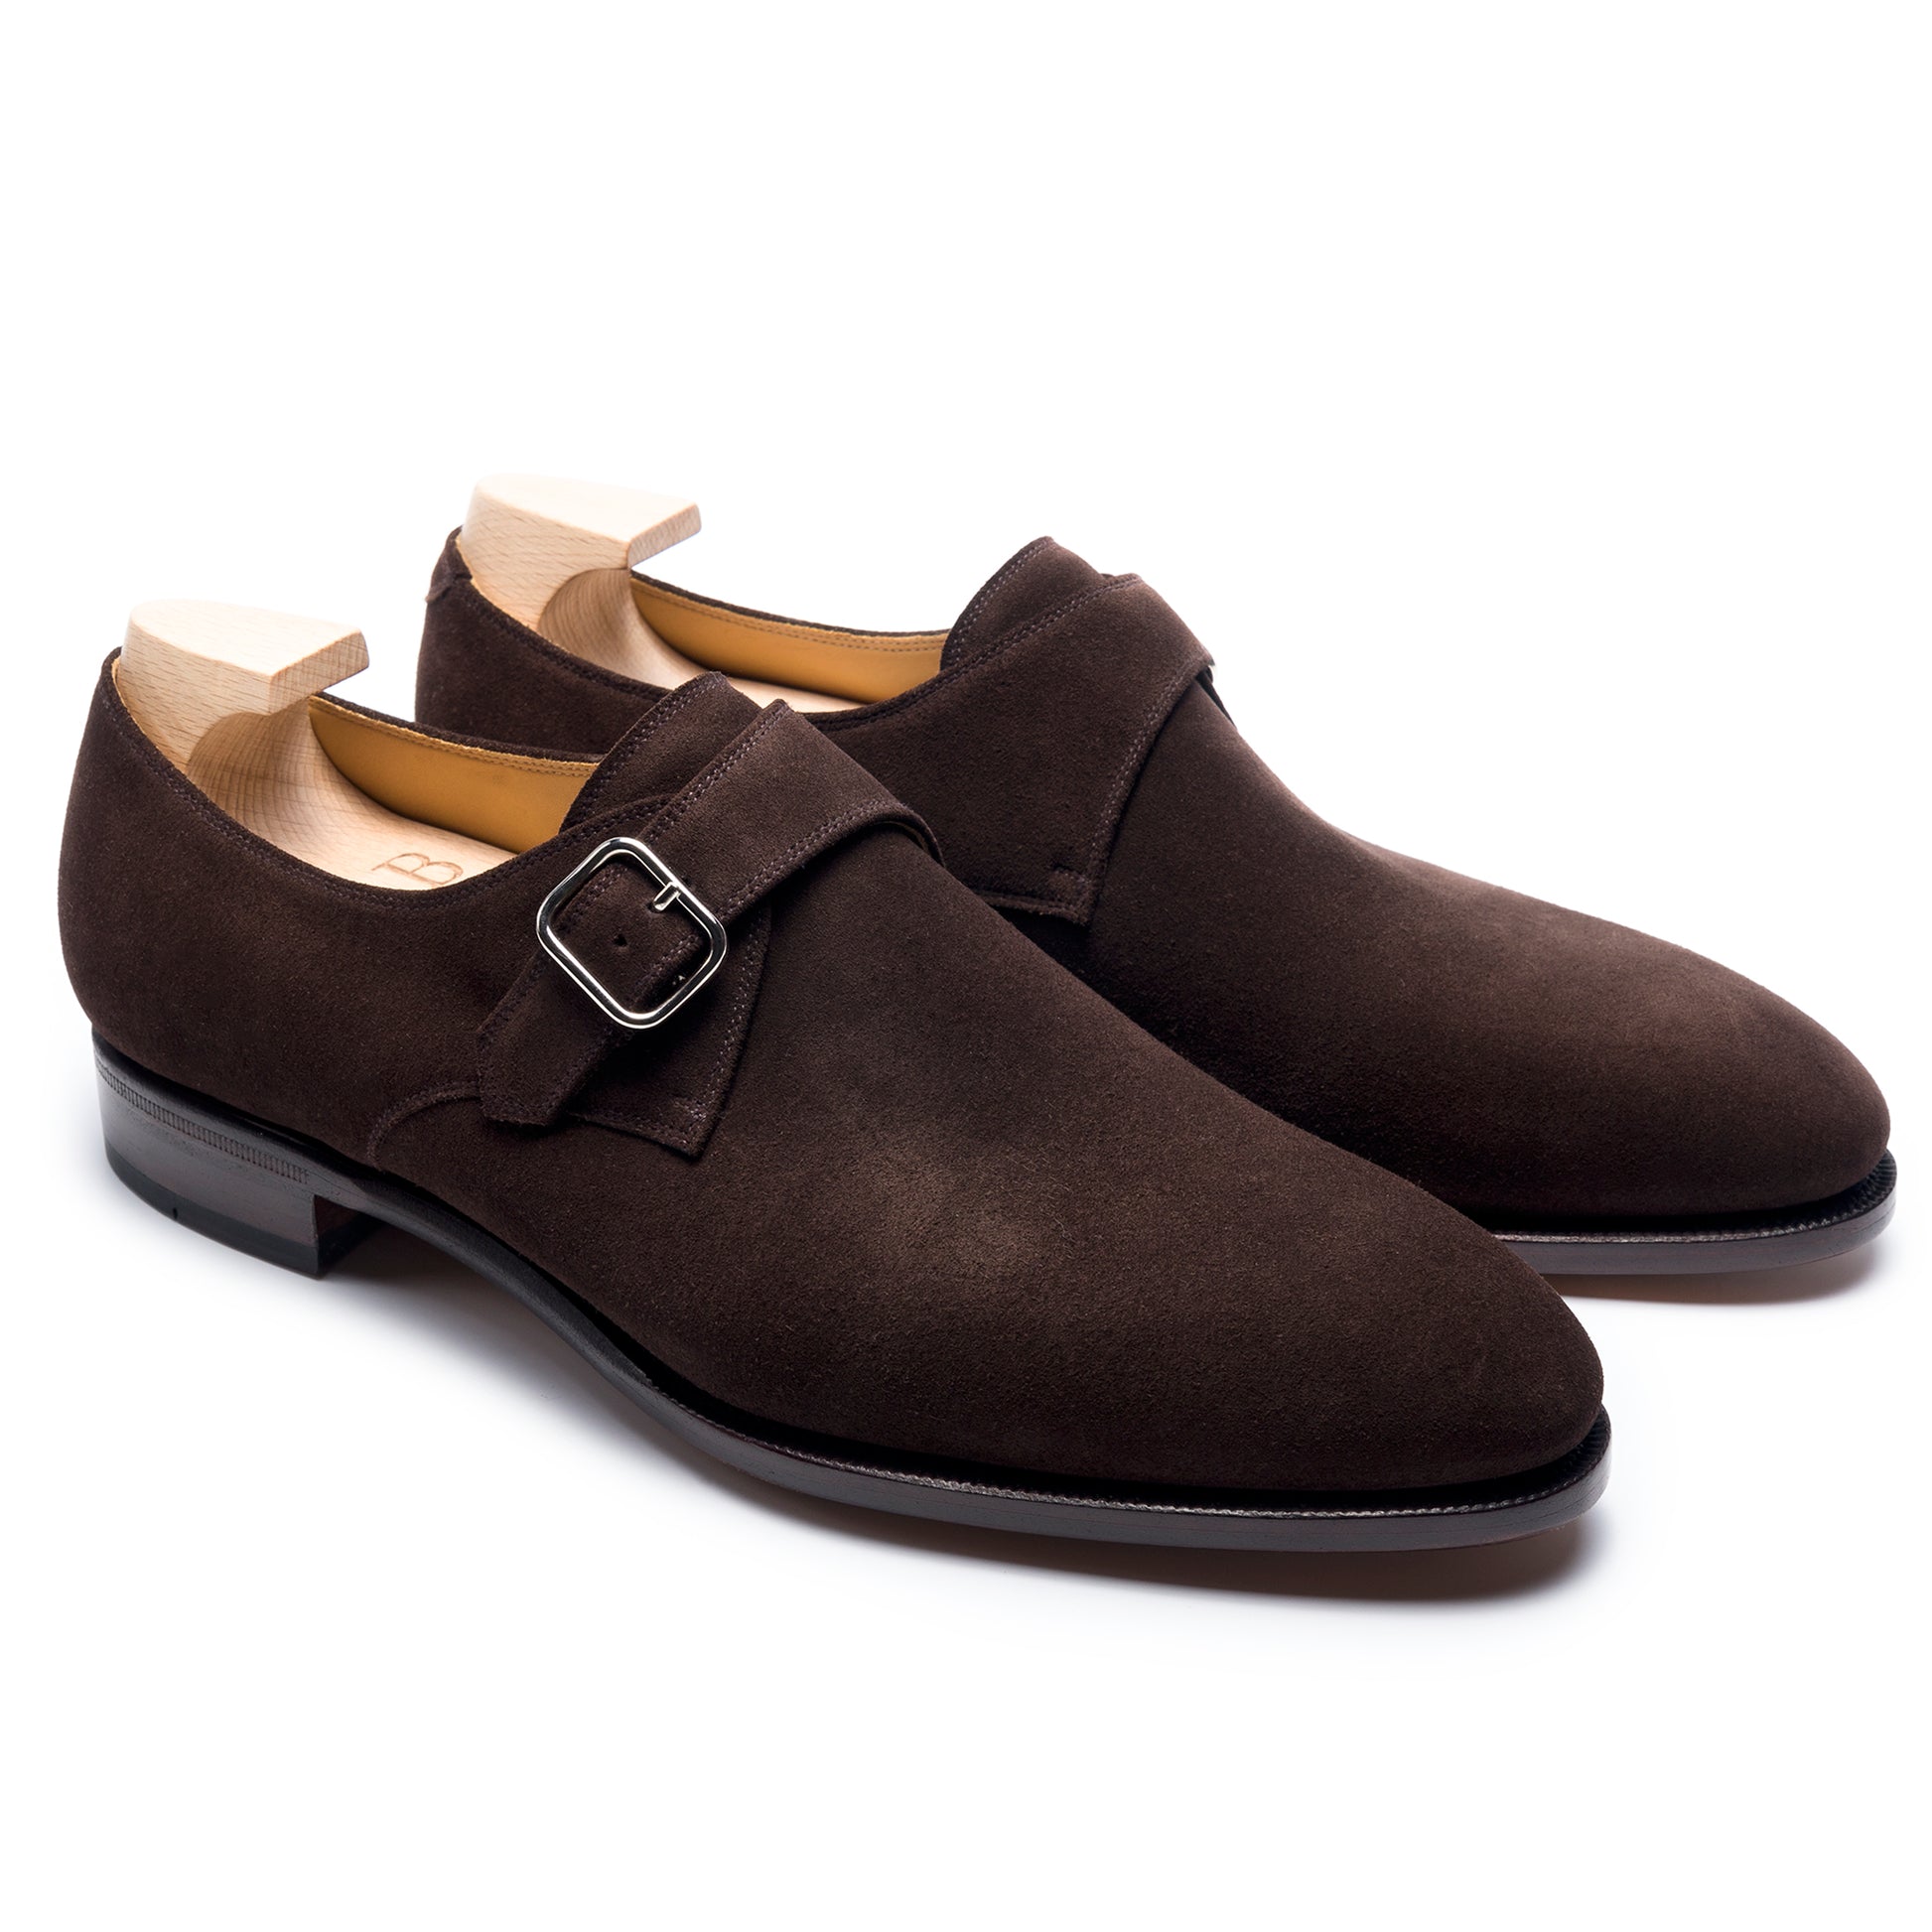 TLB Mallorca leather shoes 196 / GOYA / SUEDE BROWN / SILVER